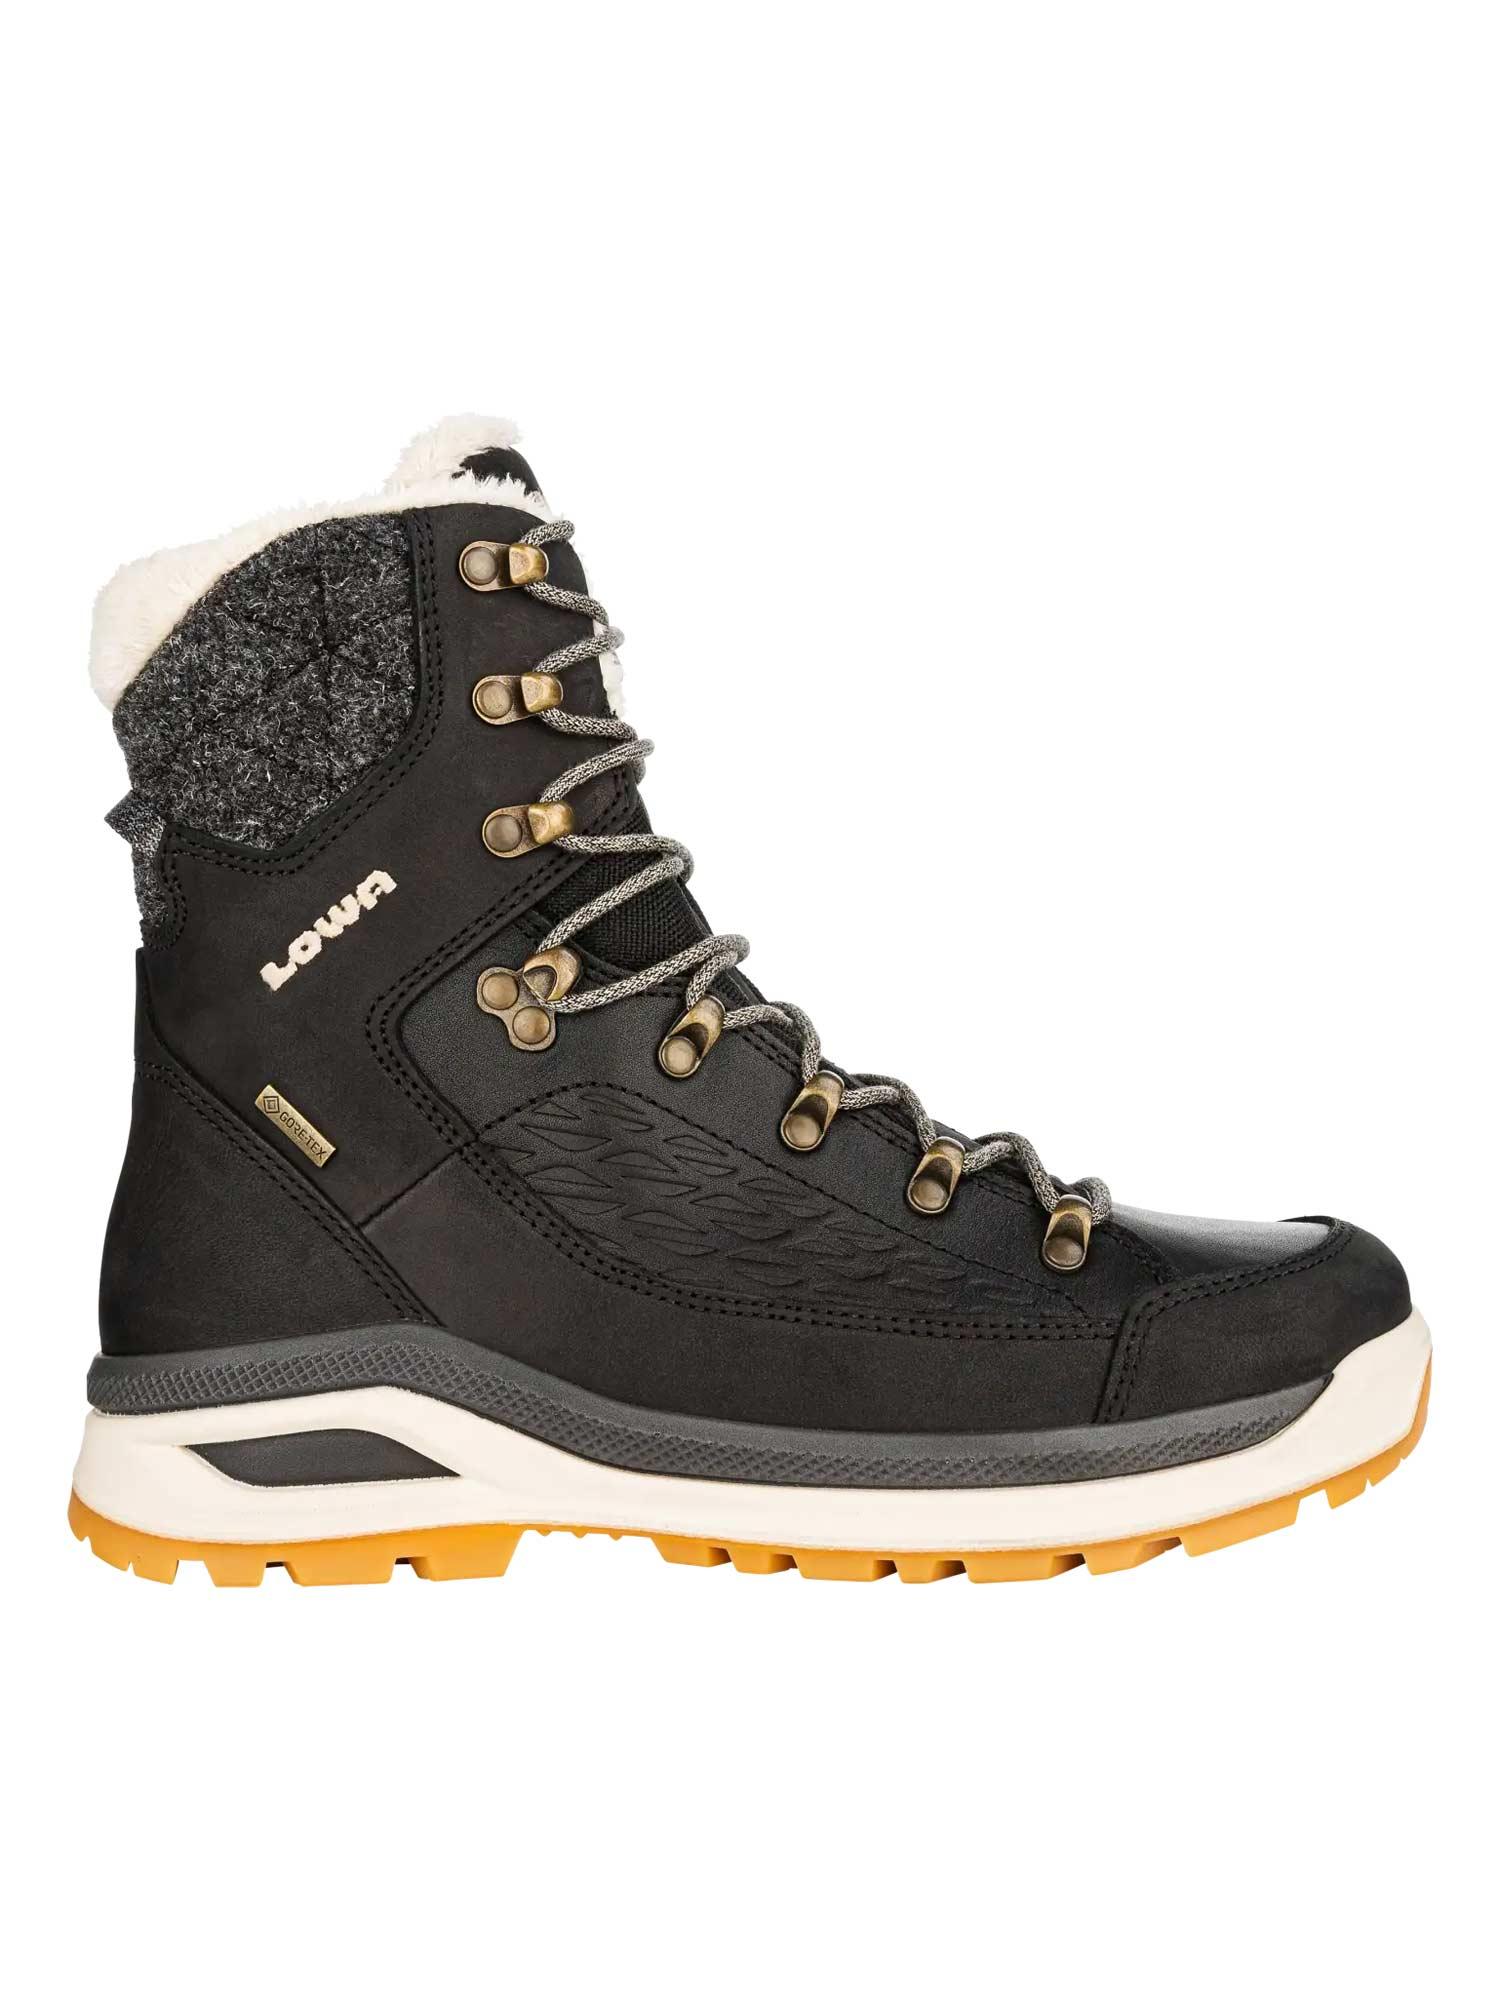 Selected image for LOWA Ženske cipele RENEGADE EVO ICE GTX Ws Boots crne